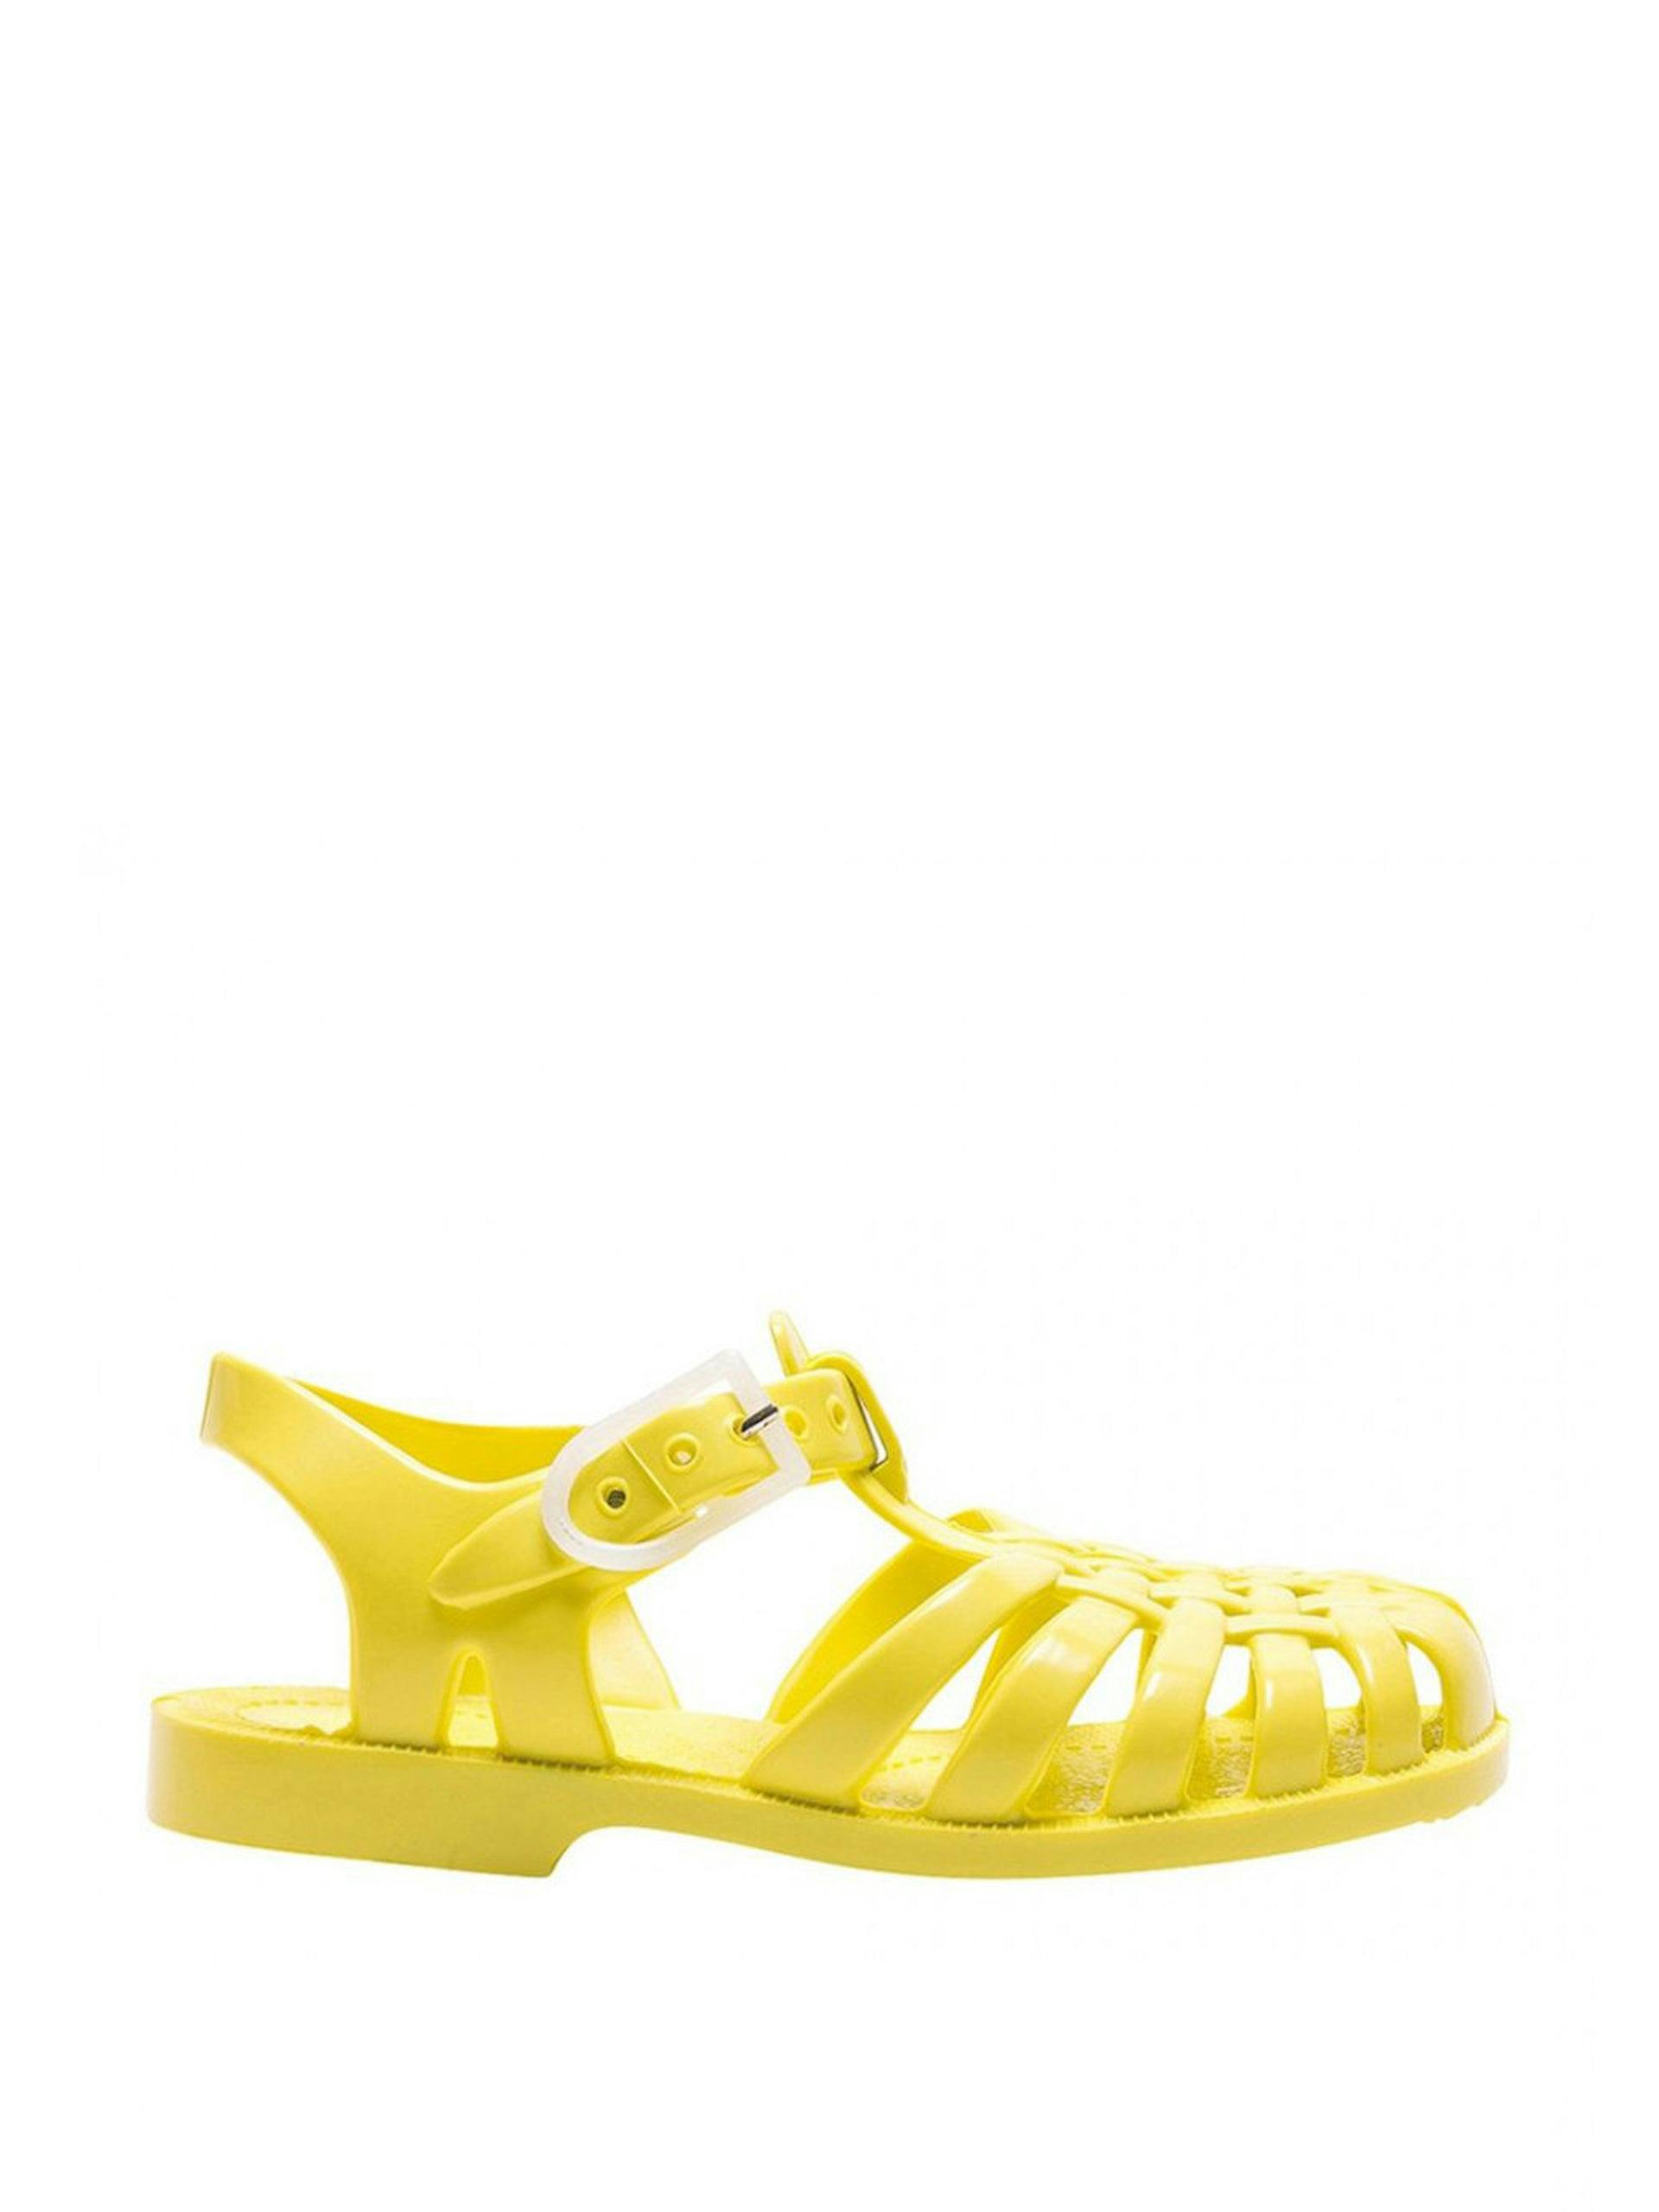 Yellow buckled sandals